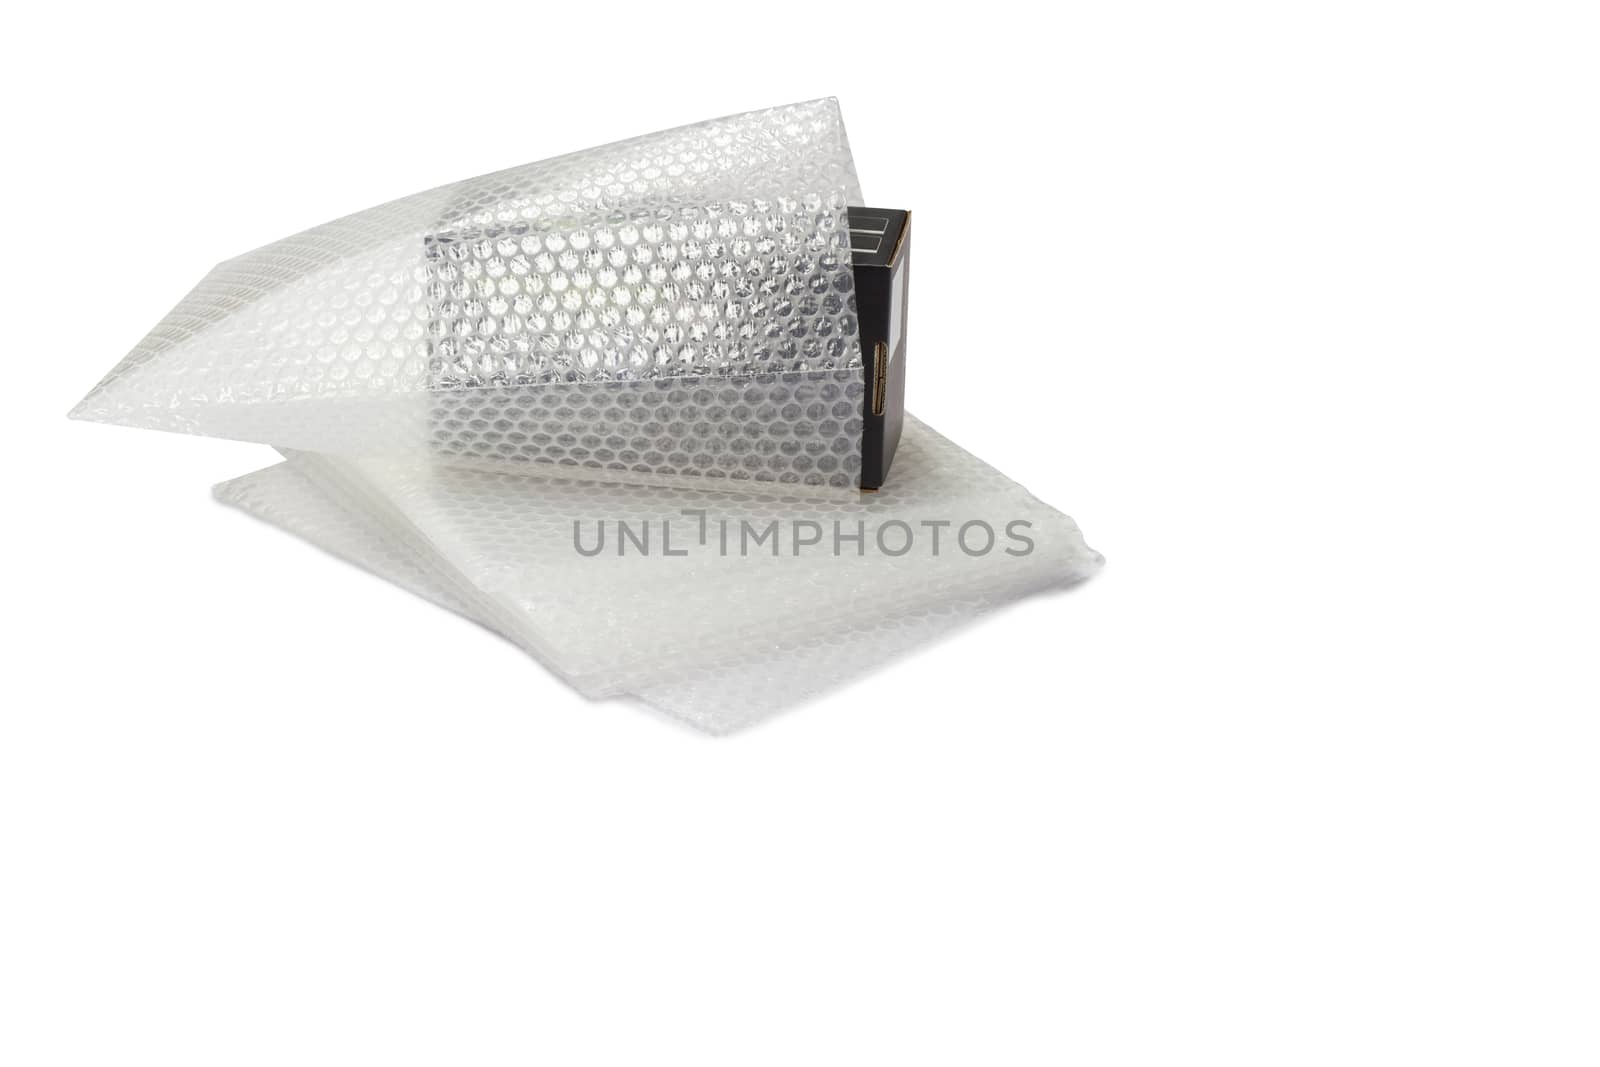 bubble wrap, for protection product cracked  or insurance During transit isolated and white background copy space